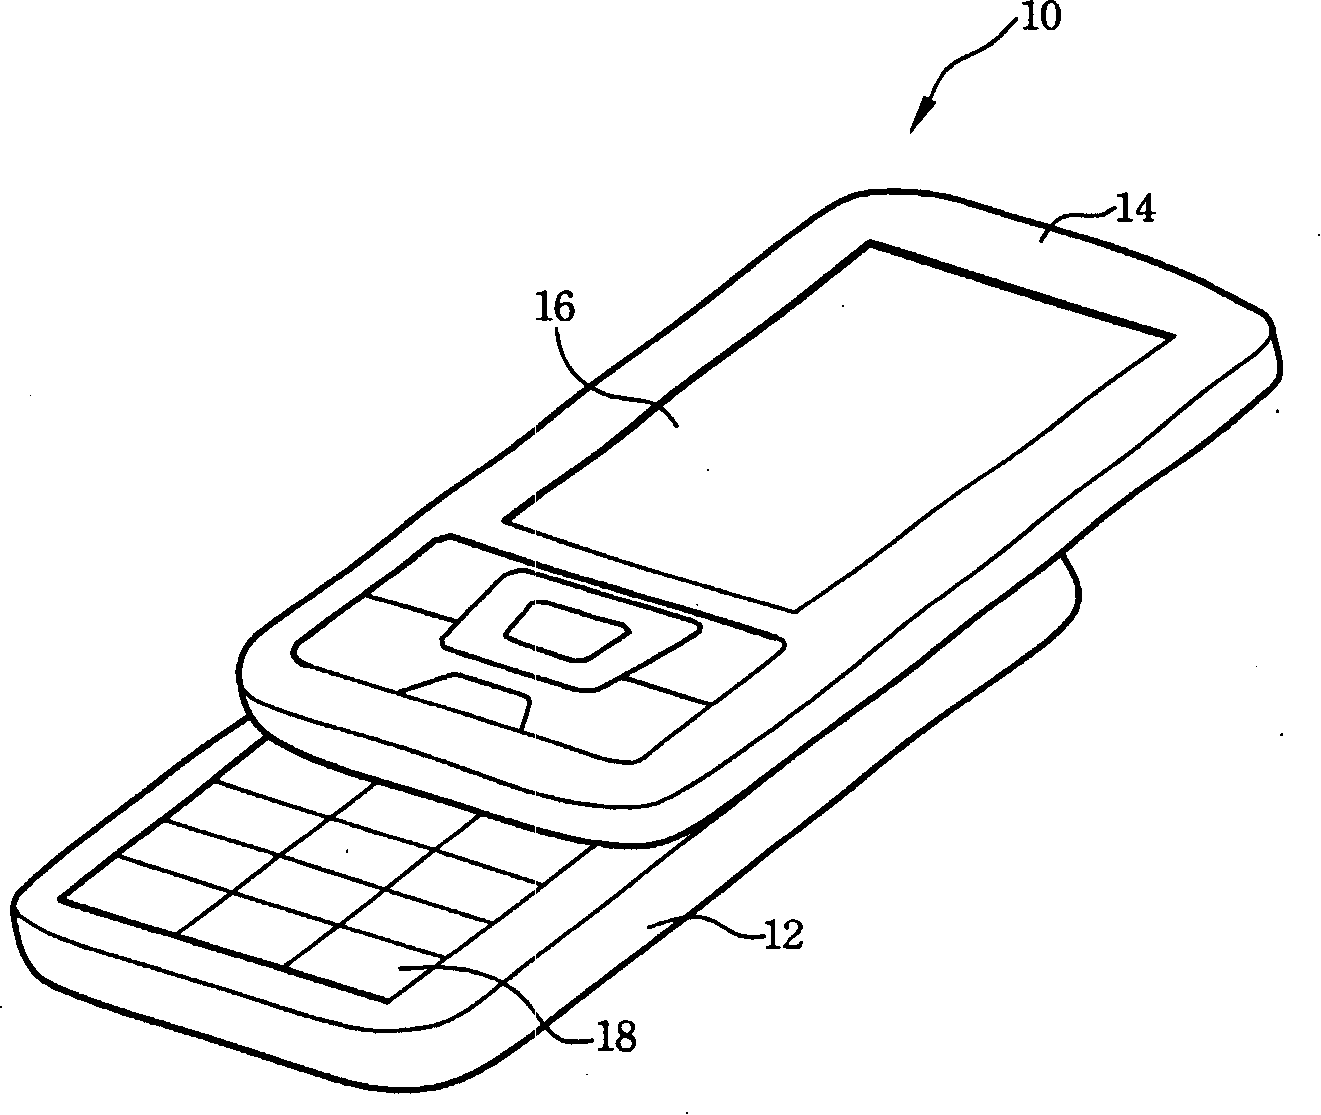 Electronic device